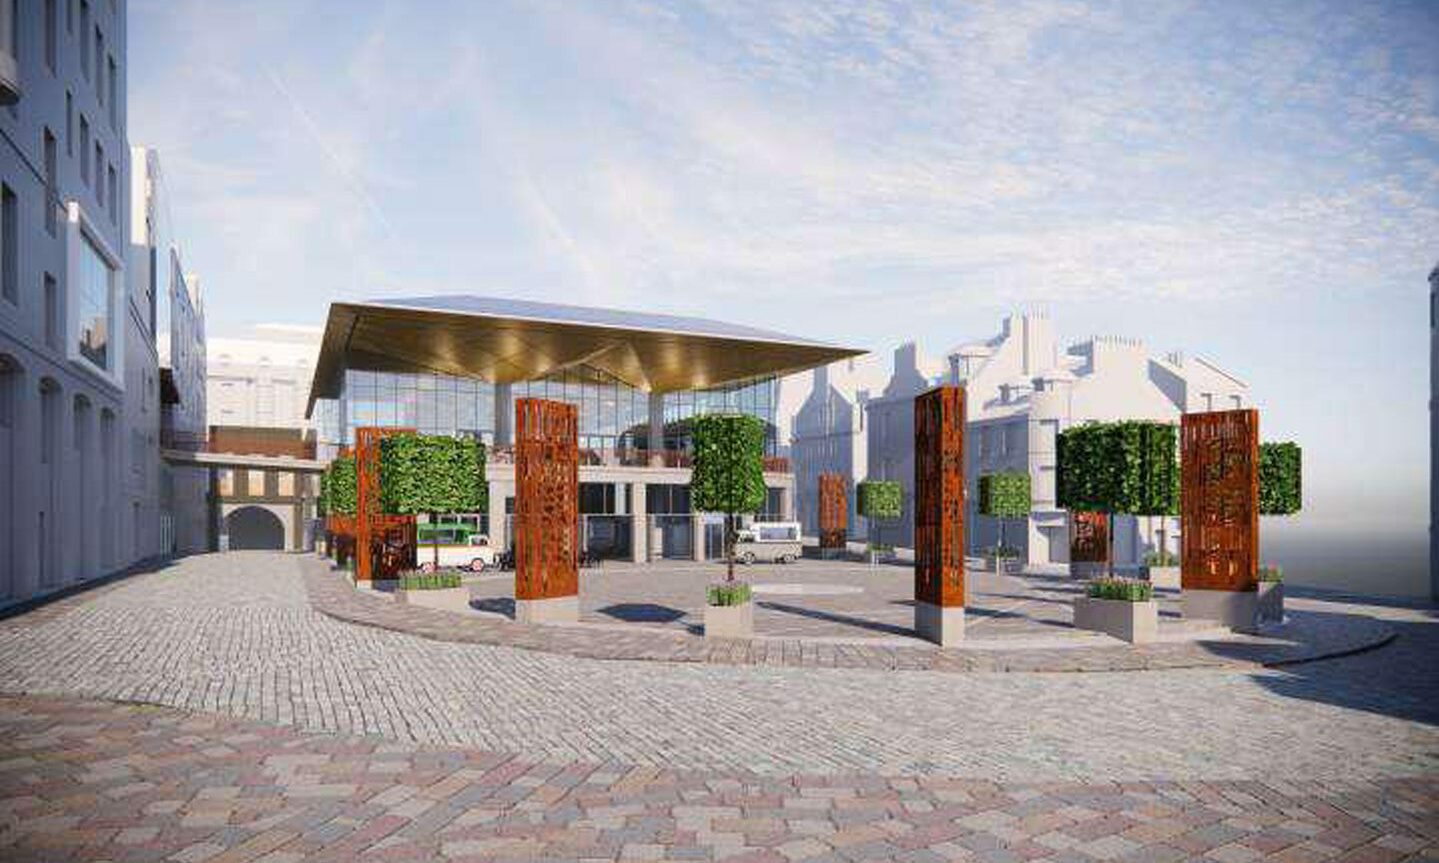 An artist's impression of a large outdoor events area at The Green